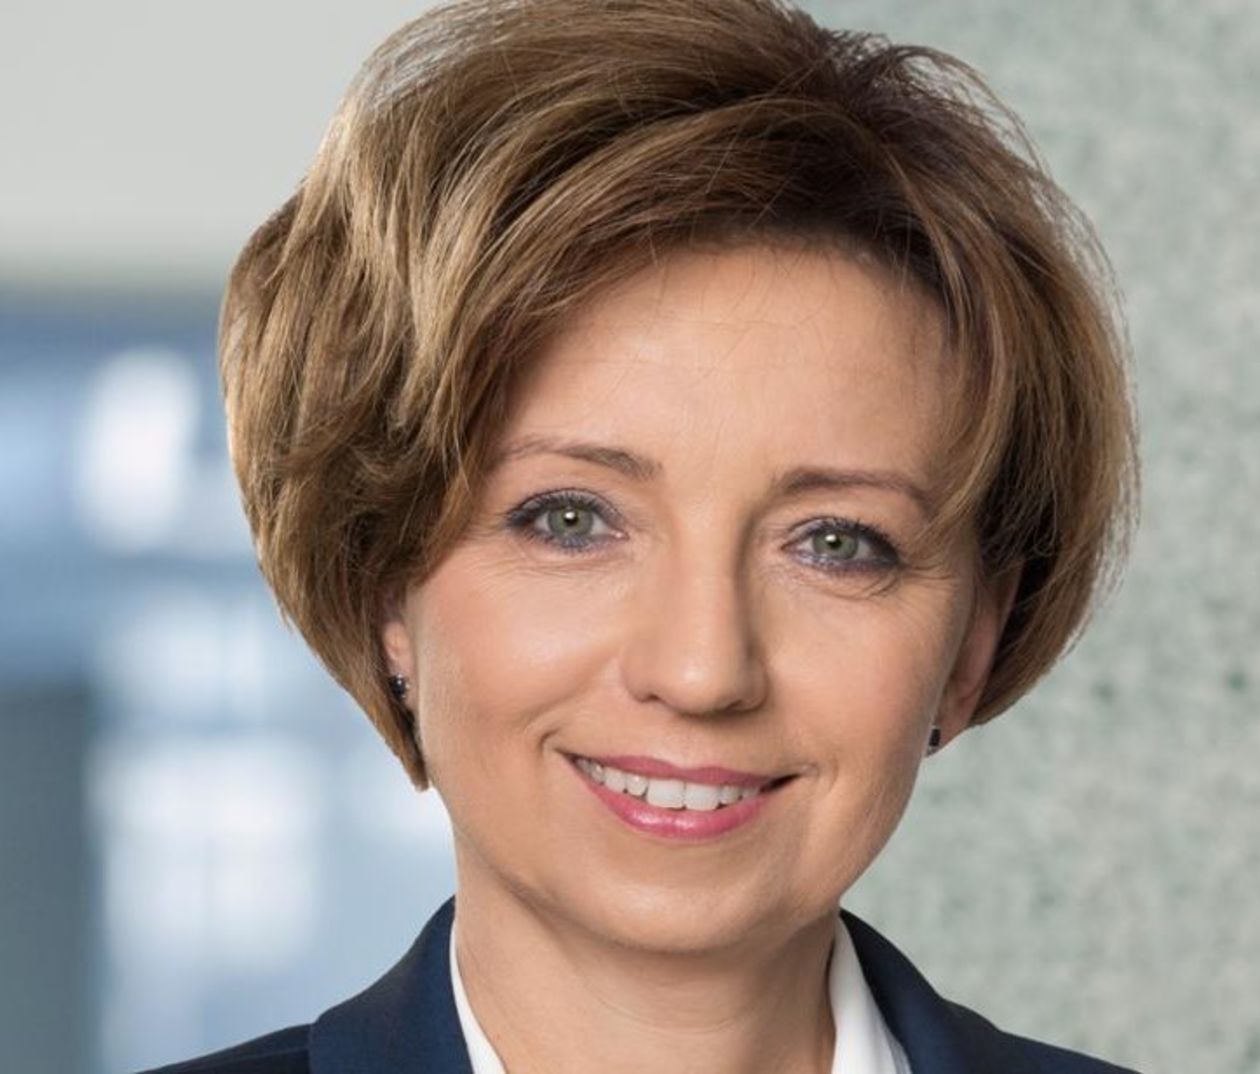  <p><strong>Marlena Maląg</strong></p>
<p>Minister Rodziny</p>